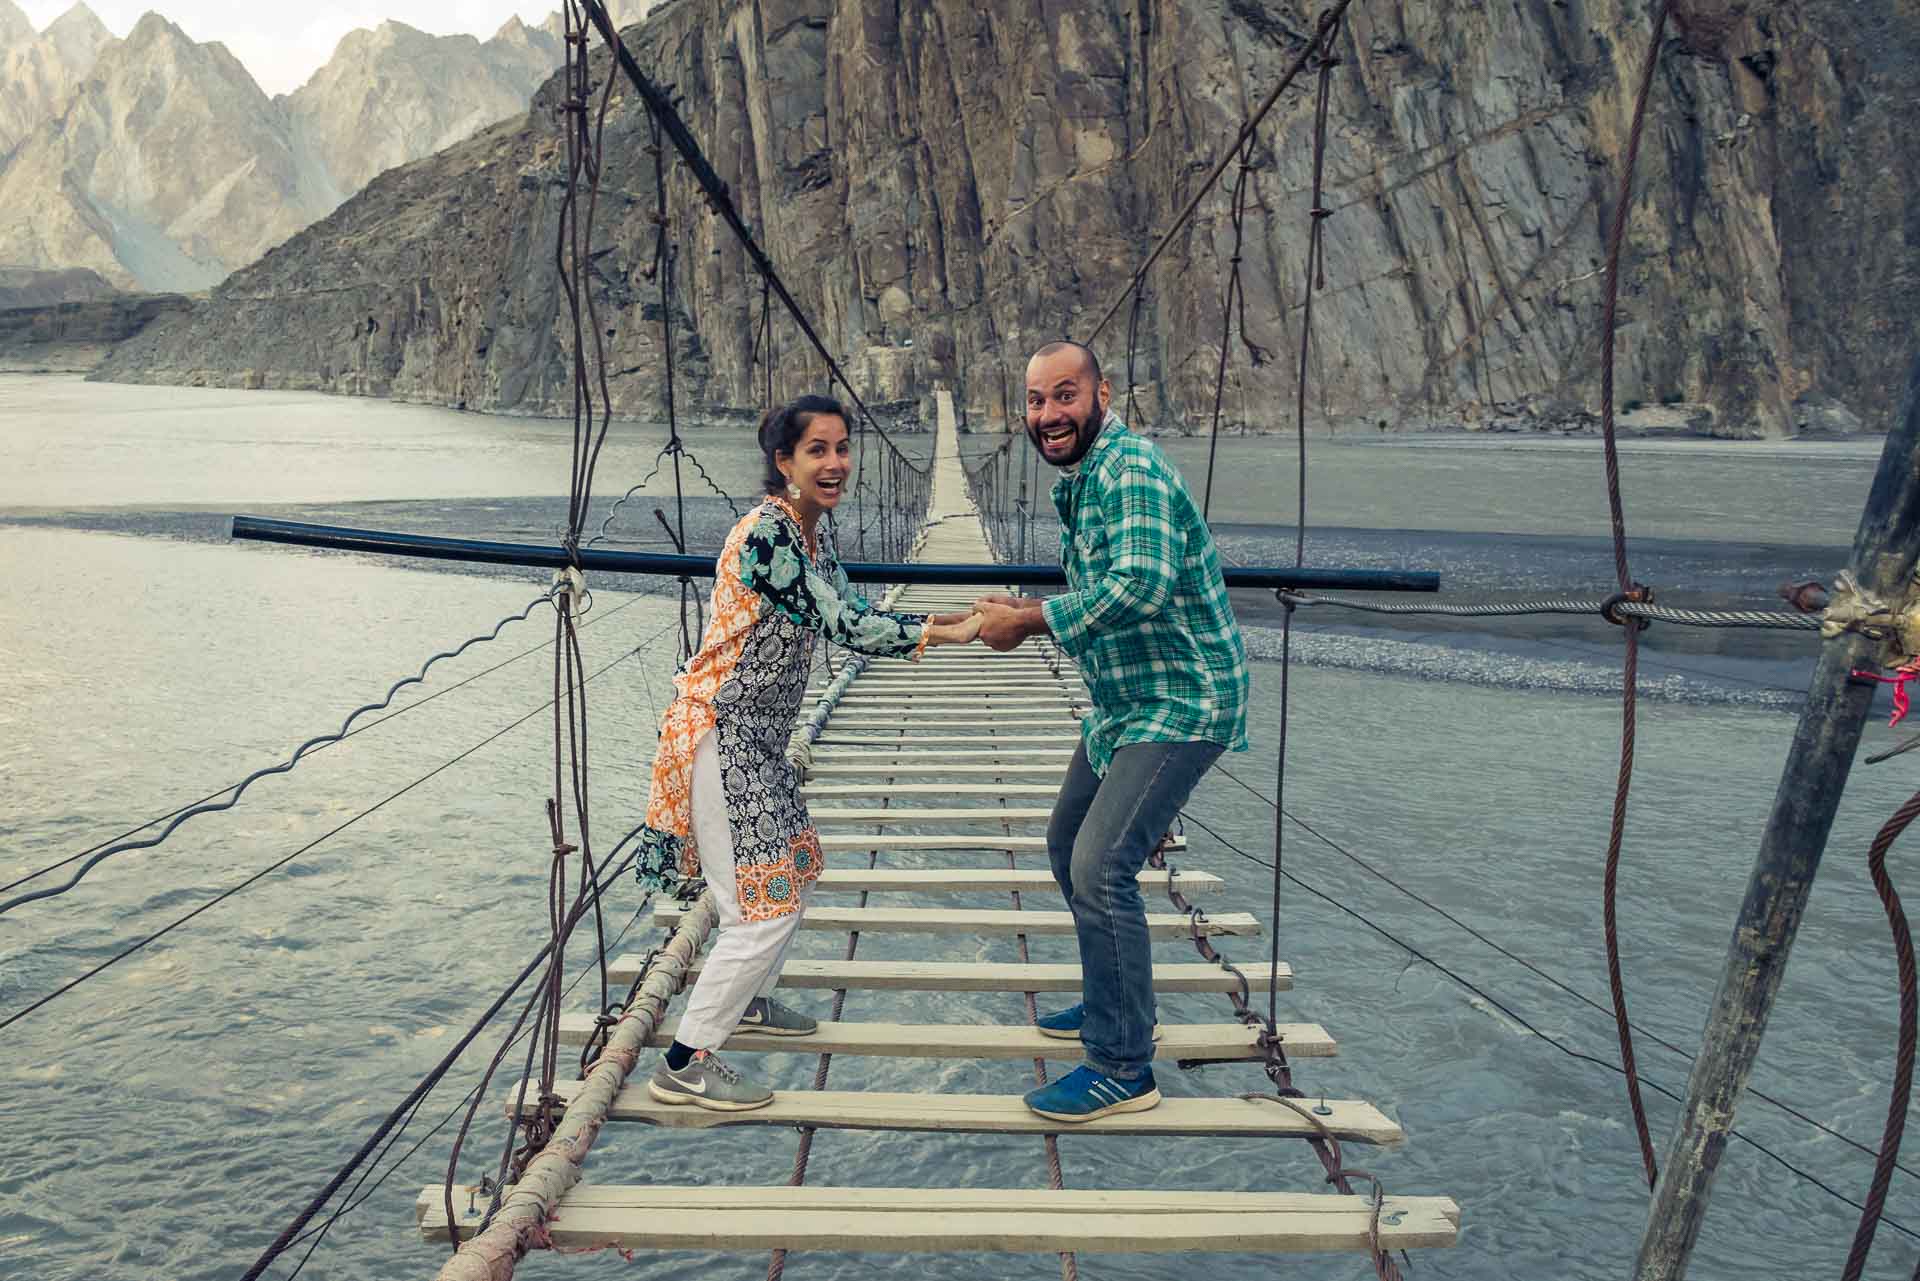 Tiago and Fernanda holding hands in the middle of a very dangerous bridge on top of a lake in Pakistan